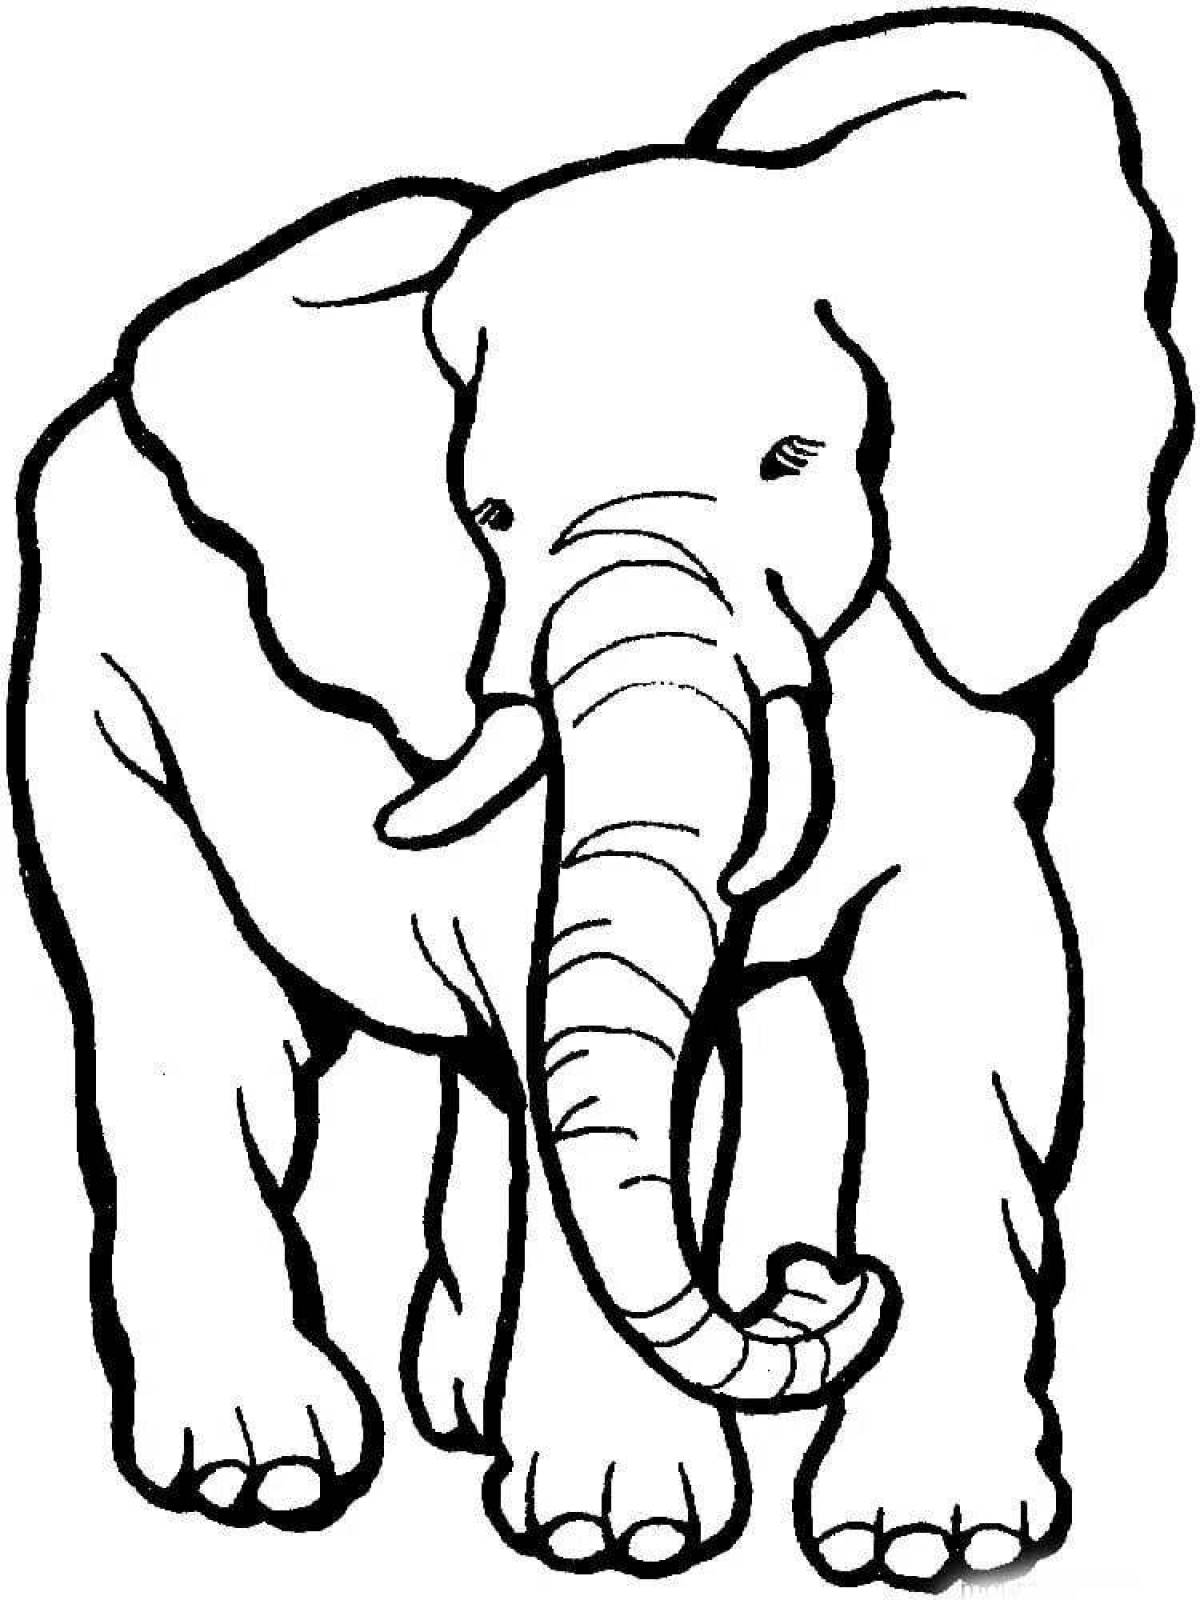 Elephant picture for kids #4